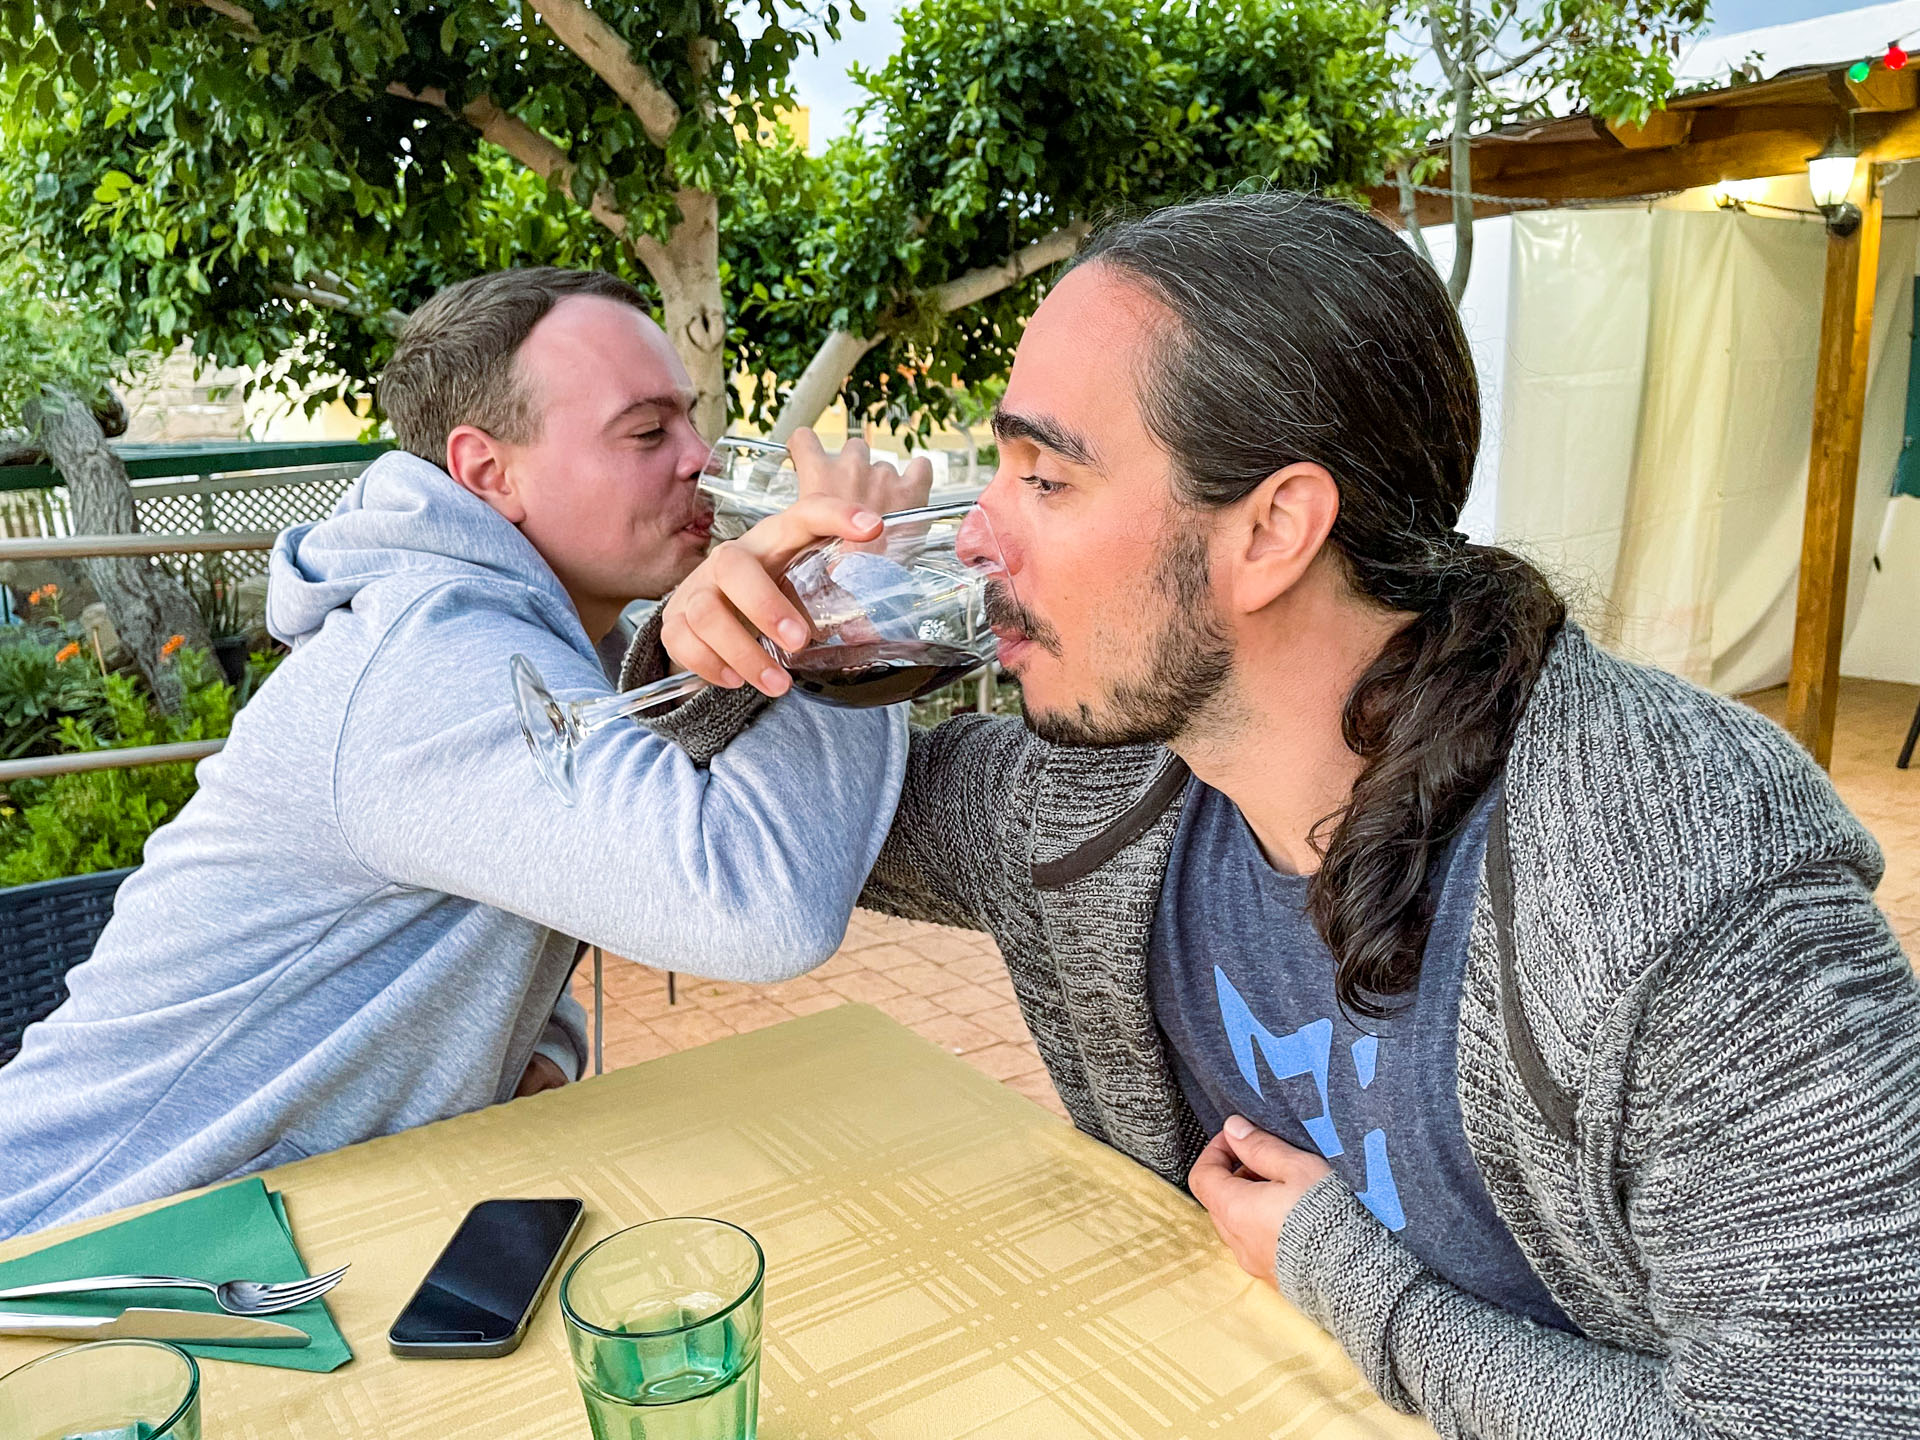 MUI X colleagues José and Andrew bond over a bottle of wine at dinner one night during the retreat.